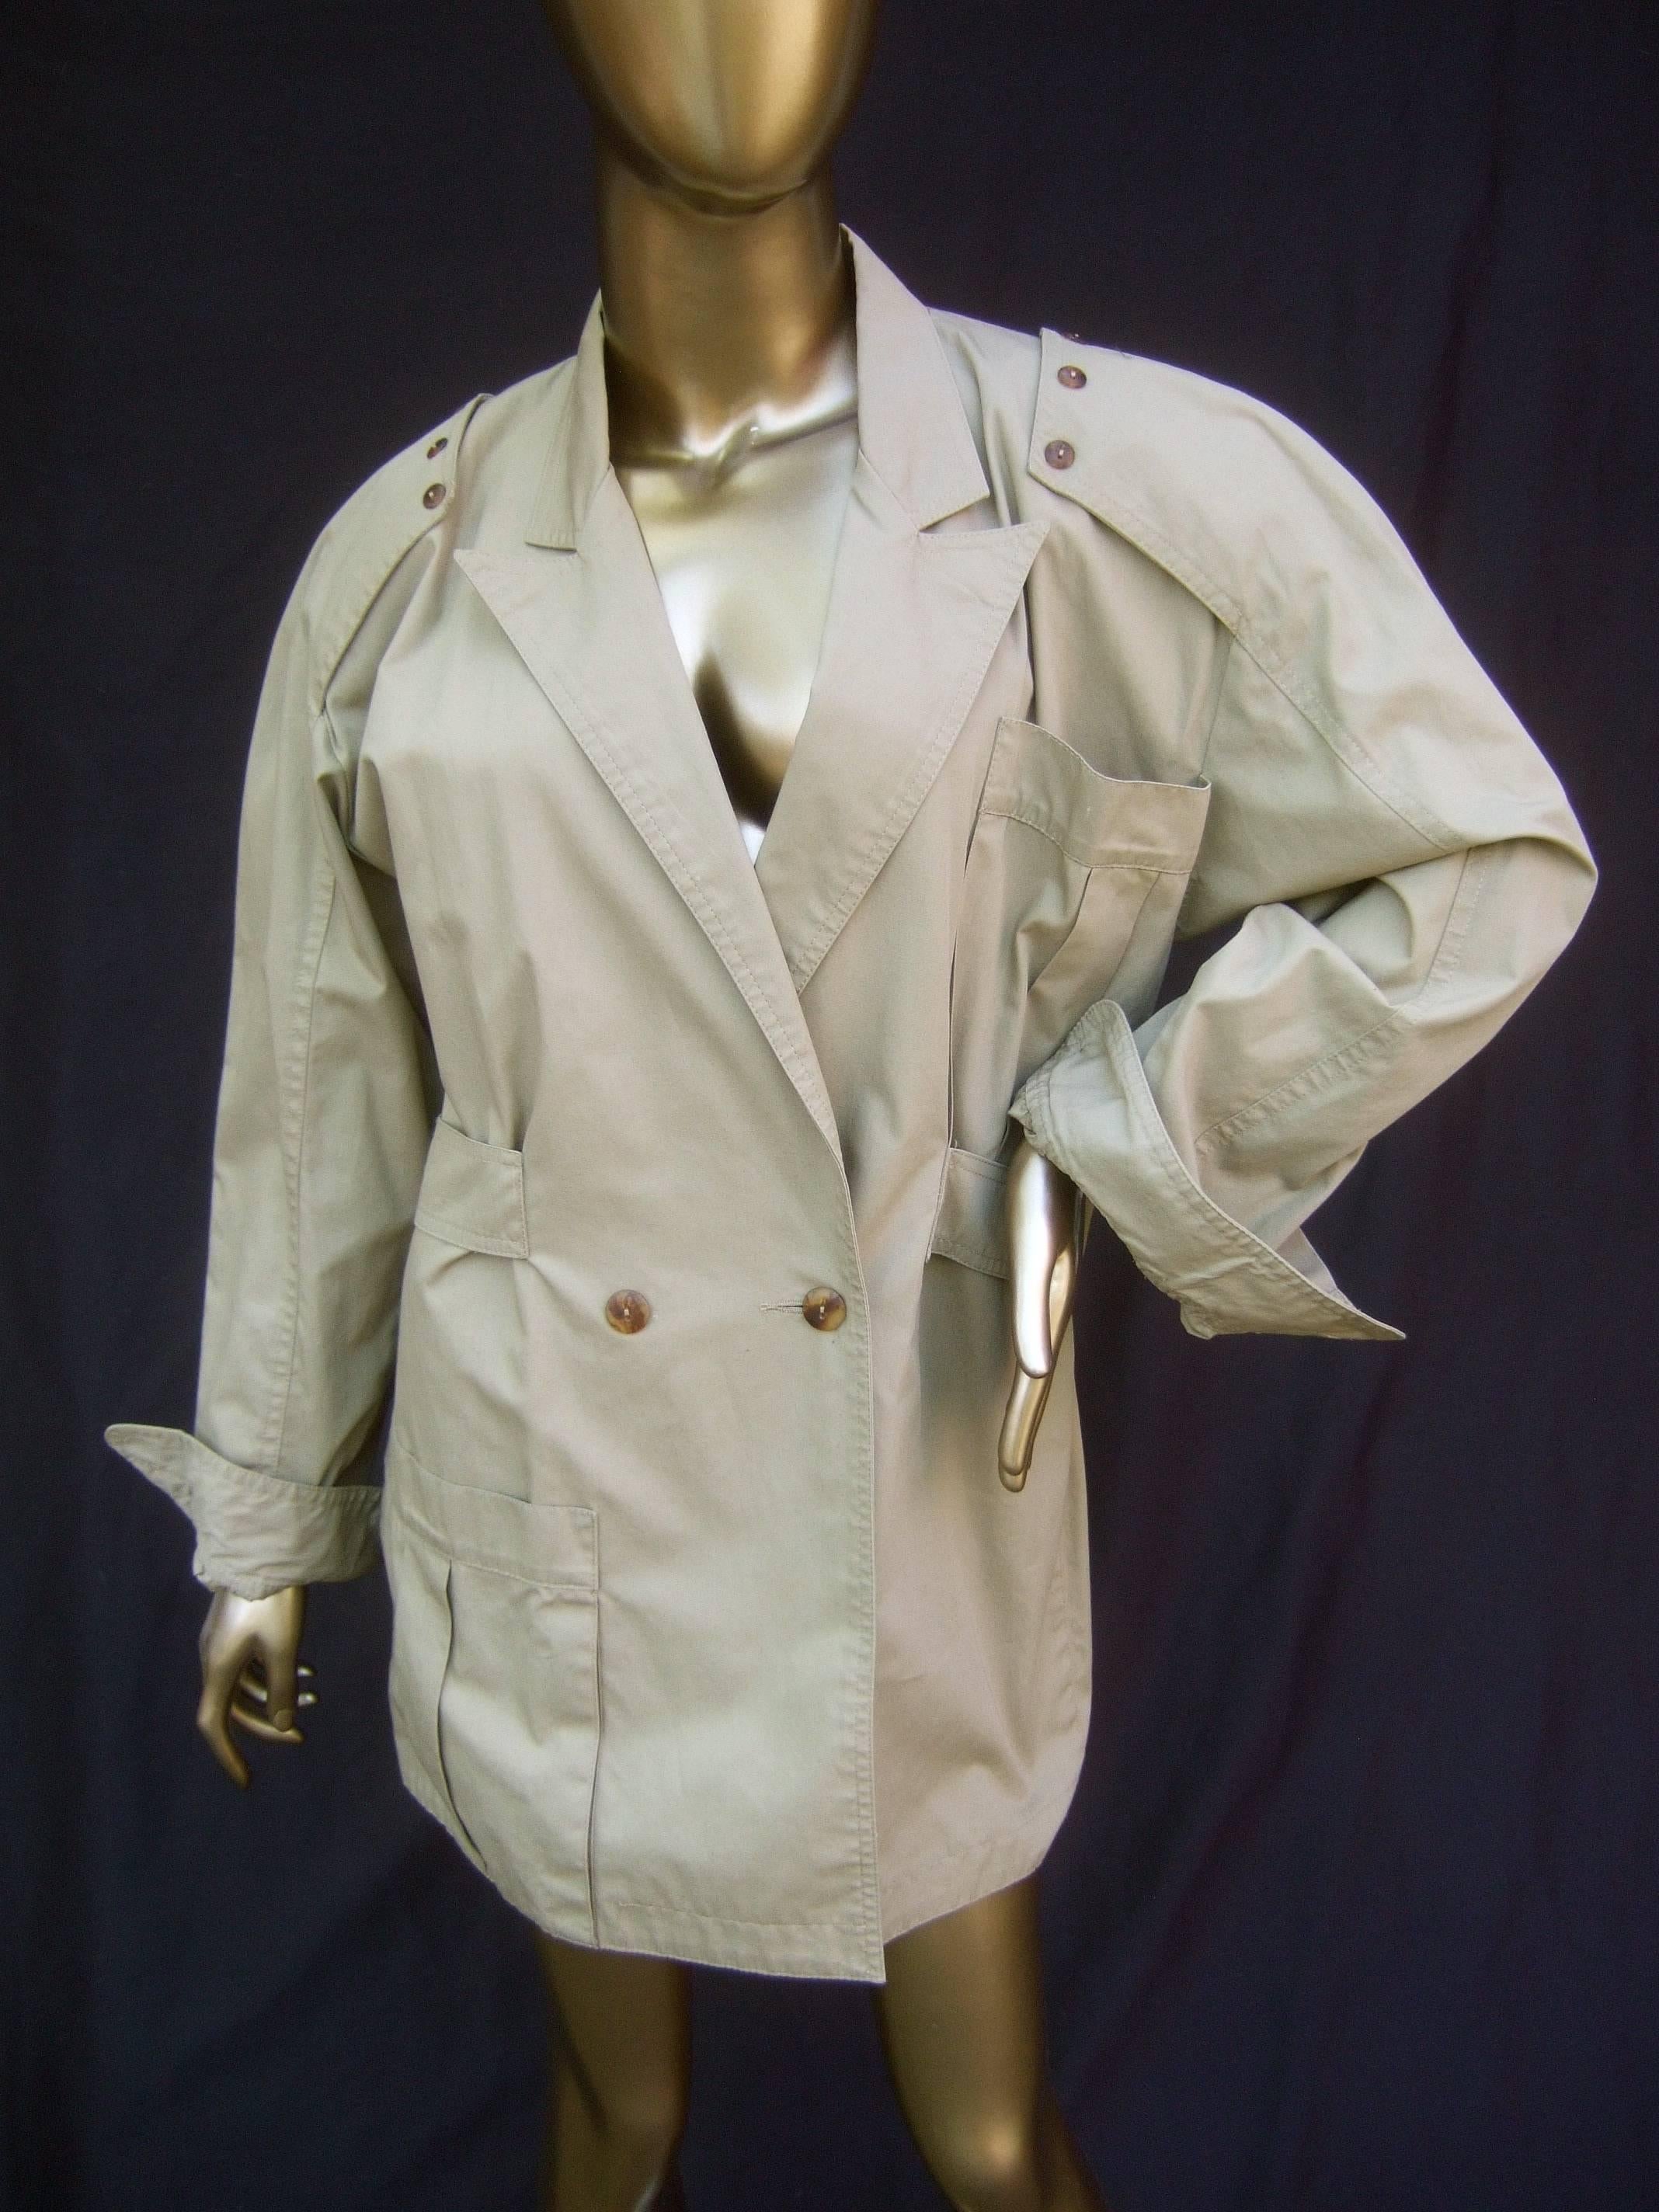 Italian tan khaki cotton sports jacket designed by La Squadra c 1970s
The classic field style jacket is infused with Italian flair
The padded shoulders have an epaulet detail with five
small tortoise shell lucite buttons

Designed with a single deep